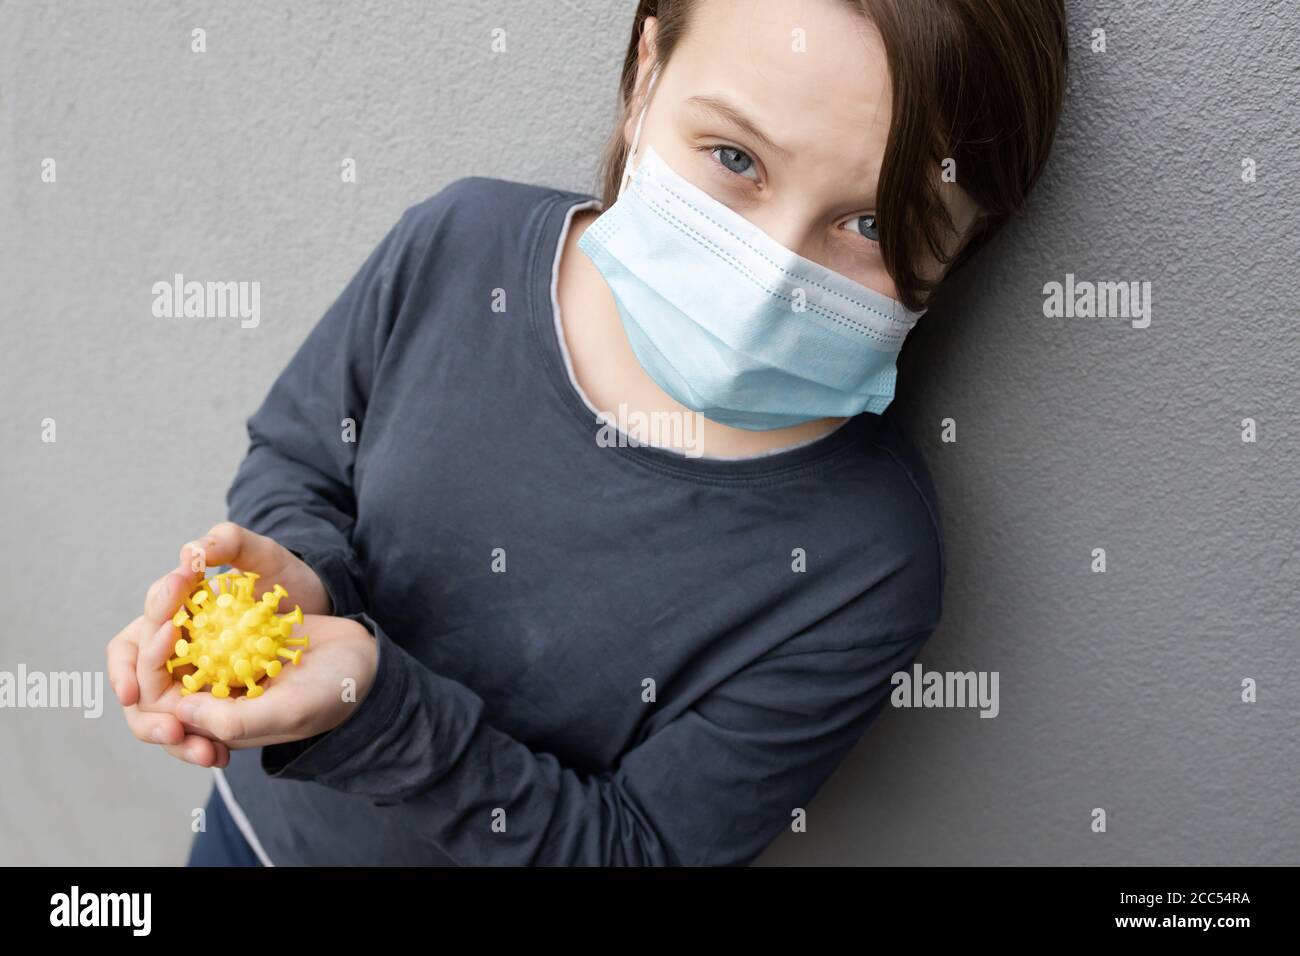 Young caucasian boy wearing a blue surgical mask and holding a corona virus model during the COVID-19 pandemic Stock Photo